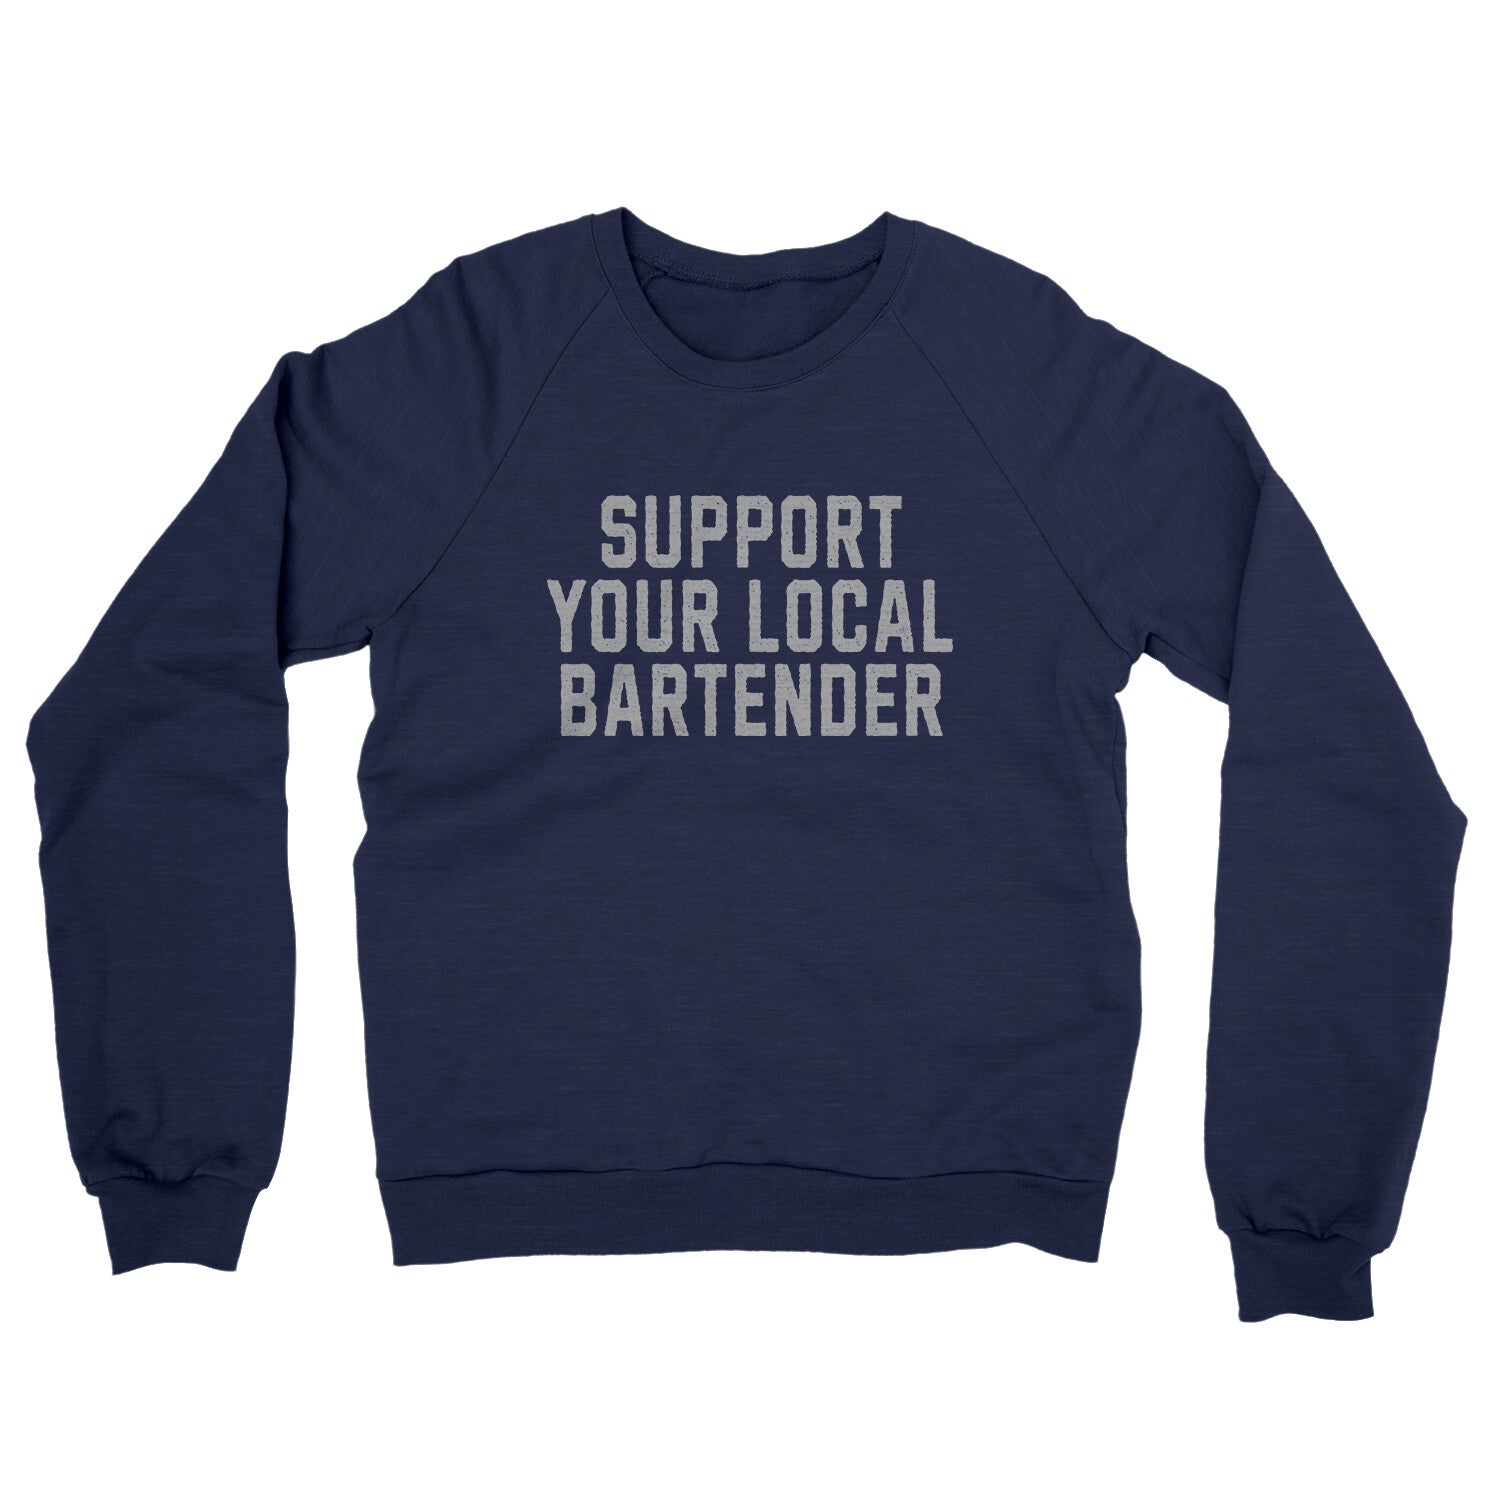 Support your Local Bartender in Navy Color